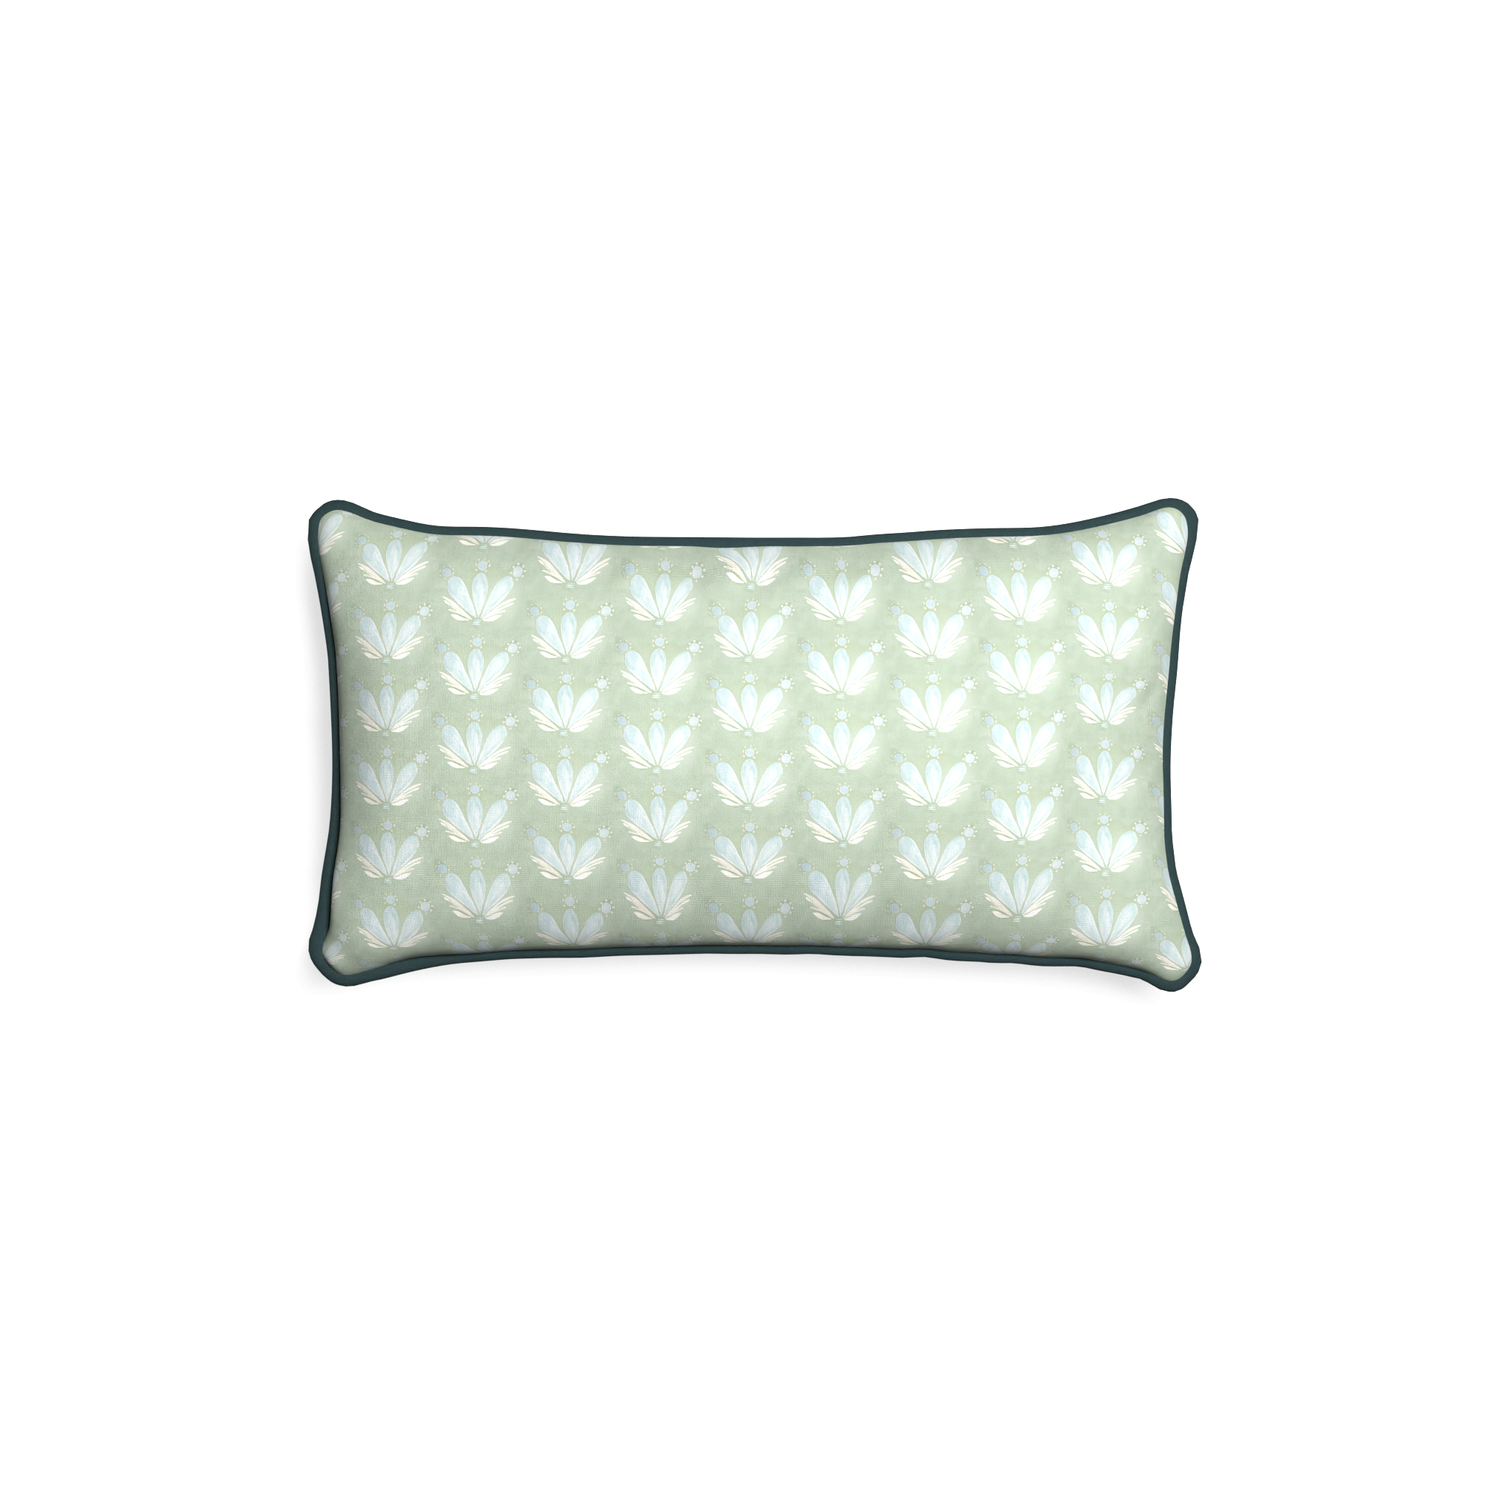 Petite-lumbar serena sea salt custom blue & green floral drop repeatpillow with p piping on white background